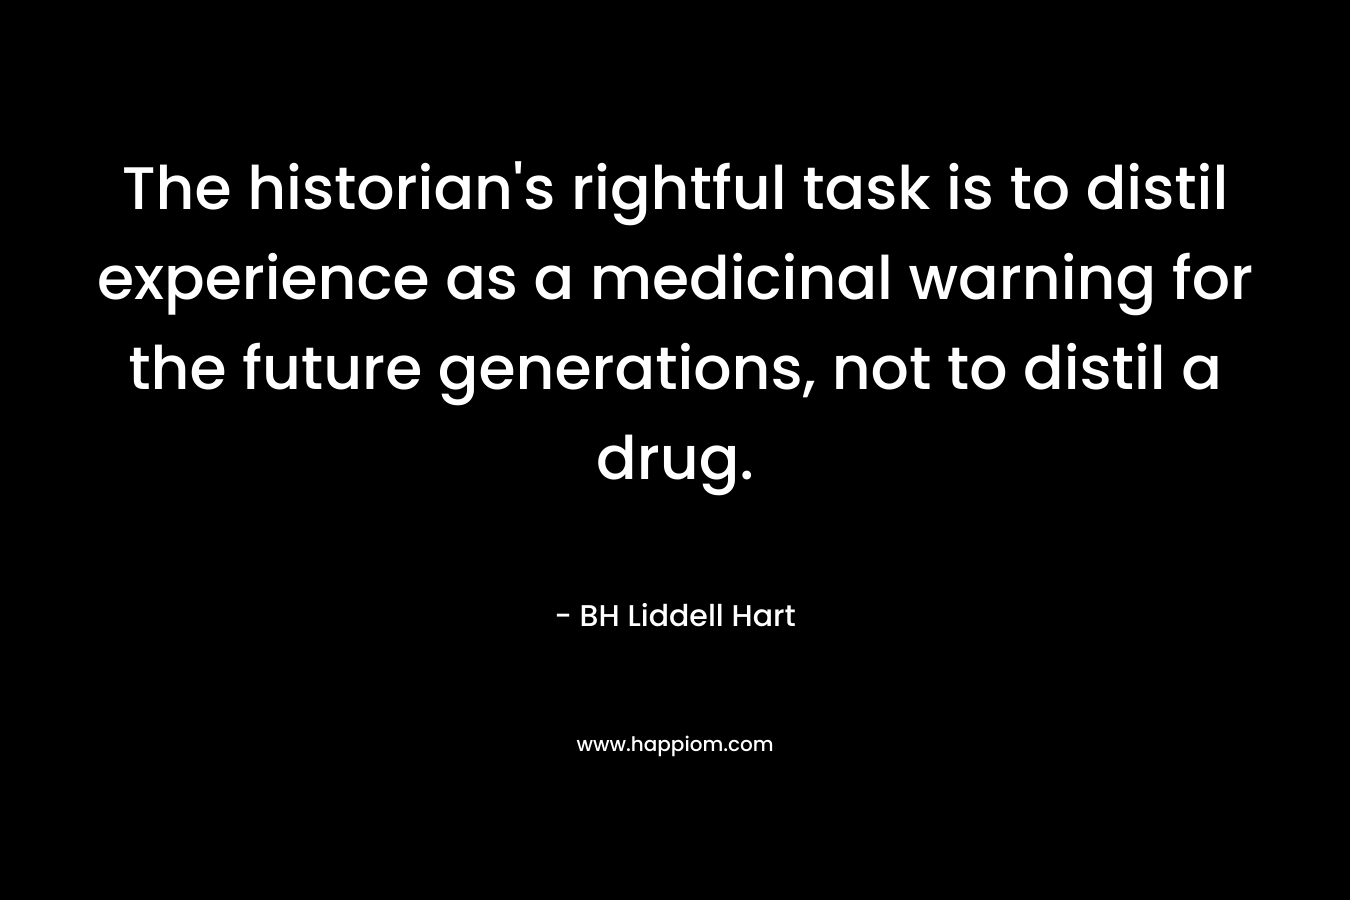 The historian’s rightful task is to distil experience as a medicinal warning for the future generations, not to distil a drug. – BH Liddell Hart